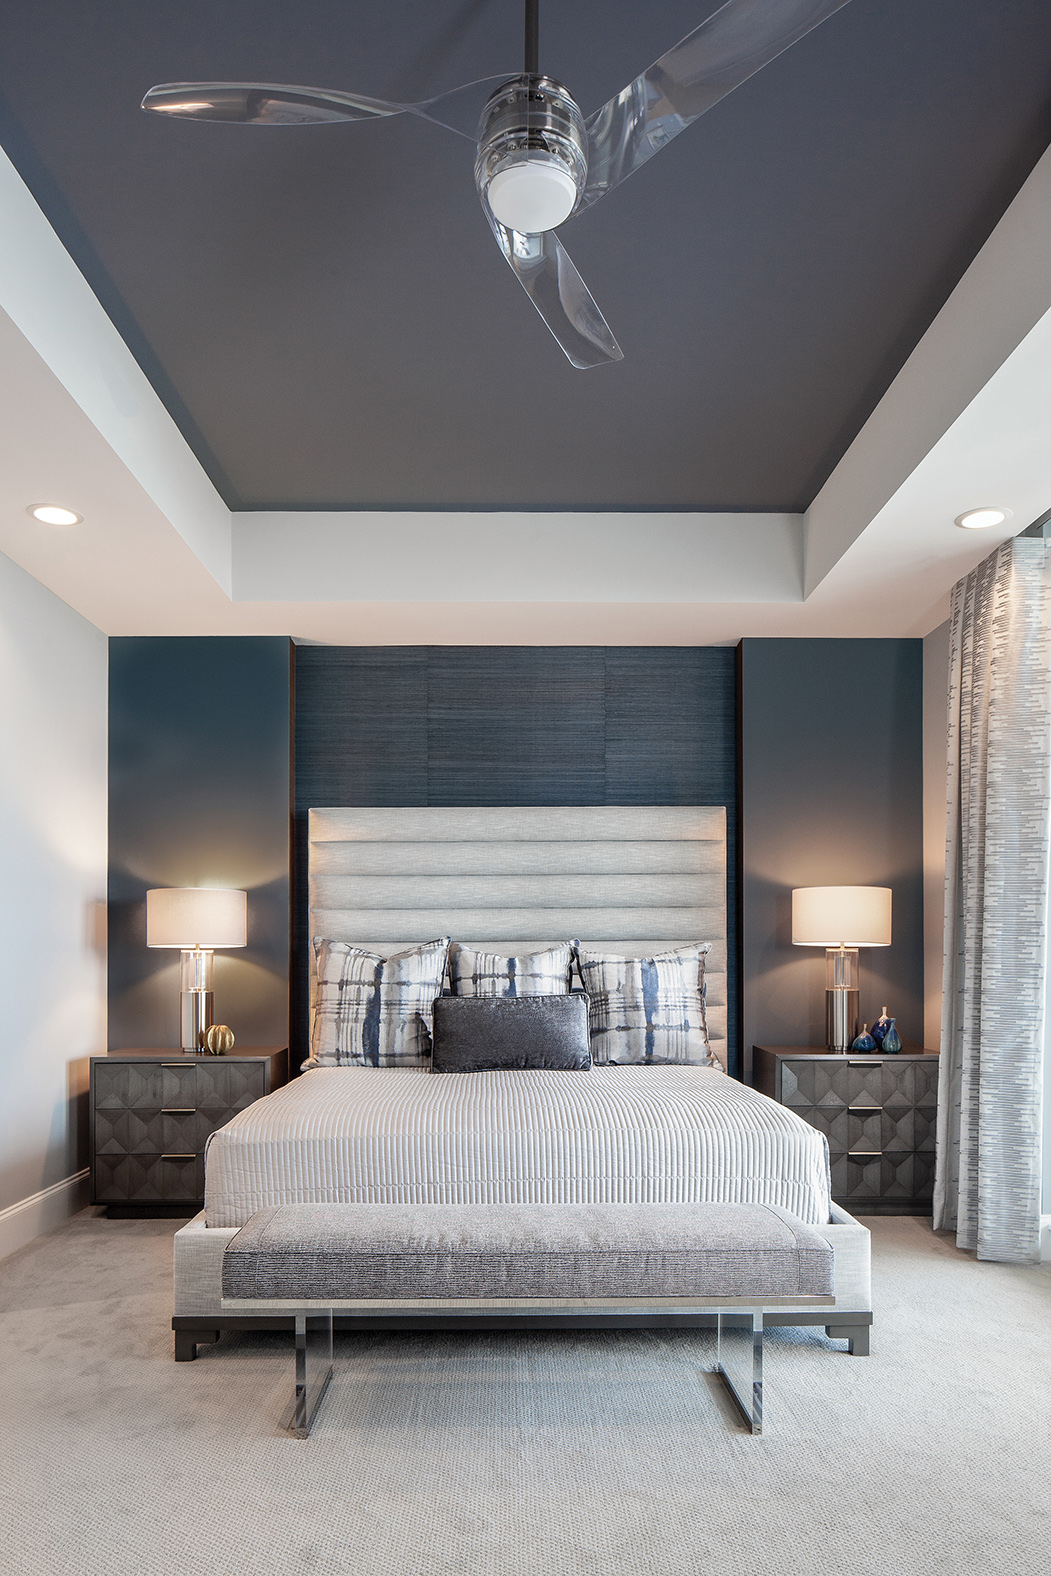  In the next unit, the deep blue walls and ceiling in the master bedroom provides a dramatic backdrop. “This room is interesting because it’s long and deep and the focal point is the back wall. We needed to add interest through depth and dimension, s